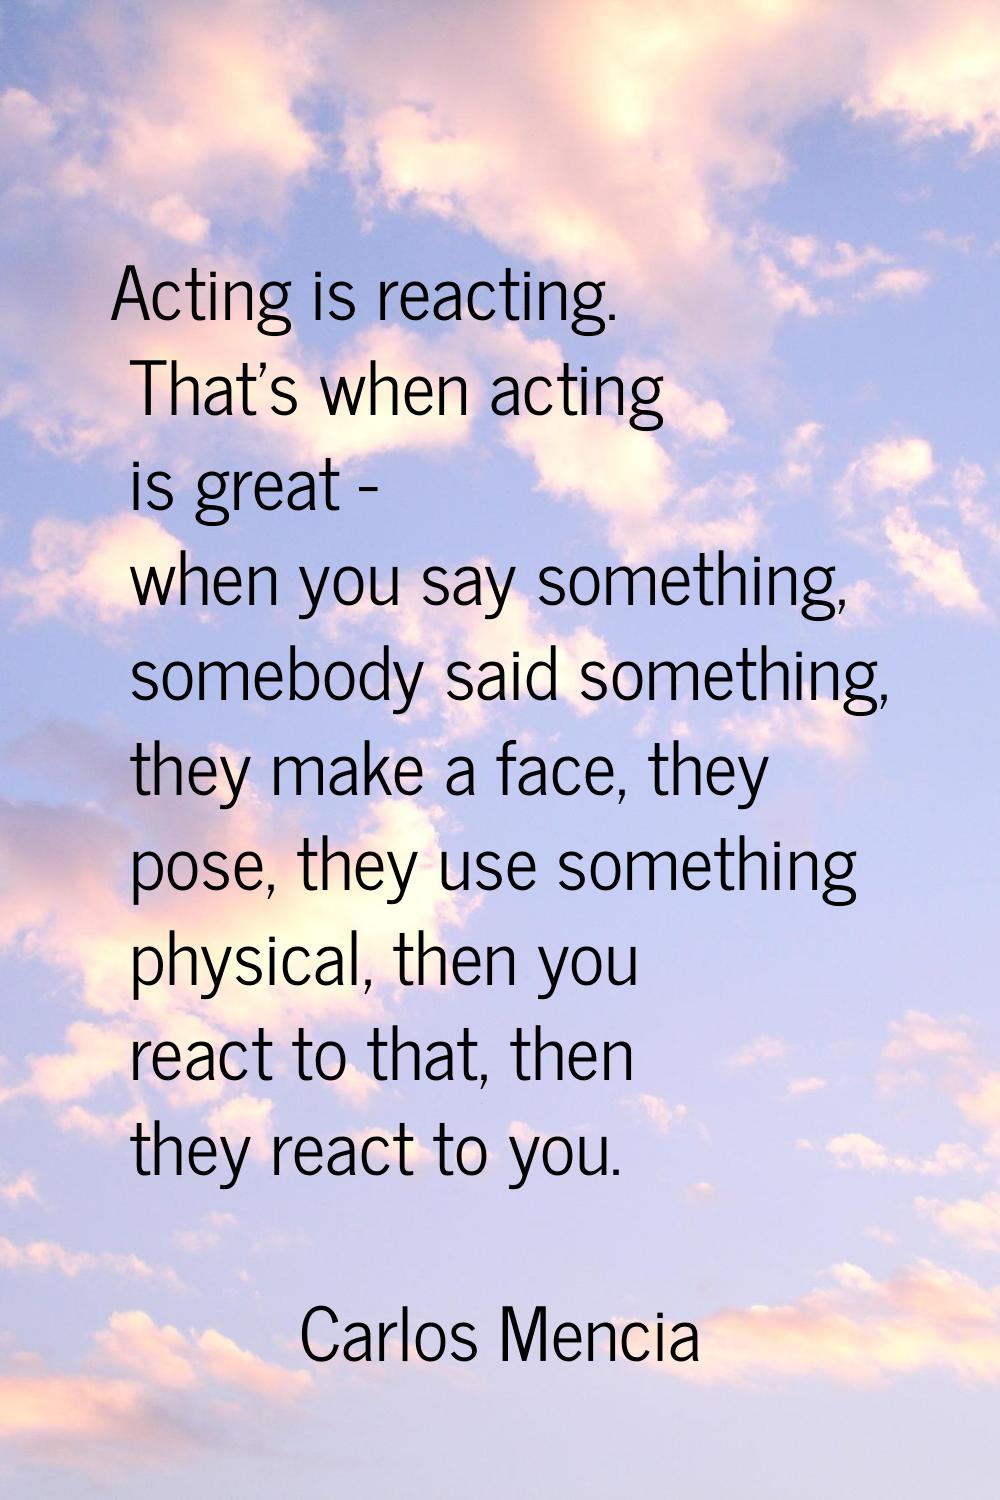 Acting is reacting. That's when acting is great - when you say something, somebody said something, 